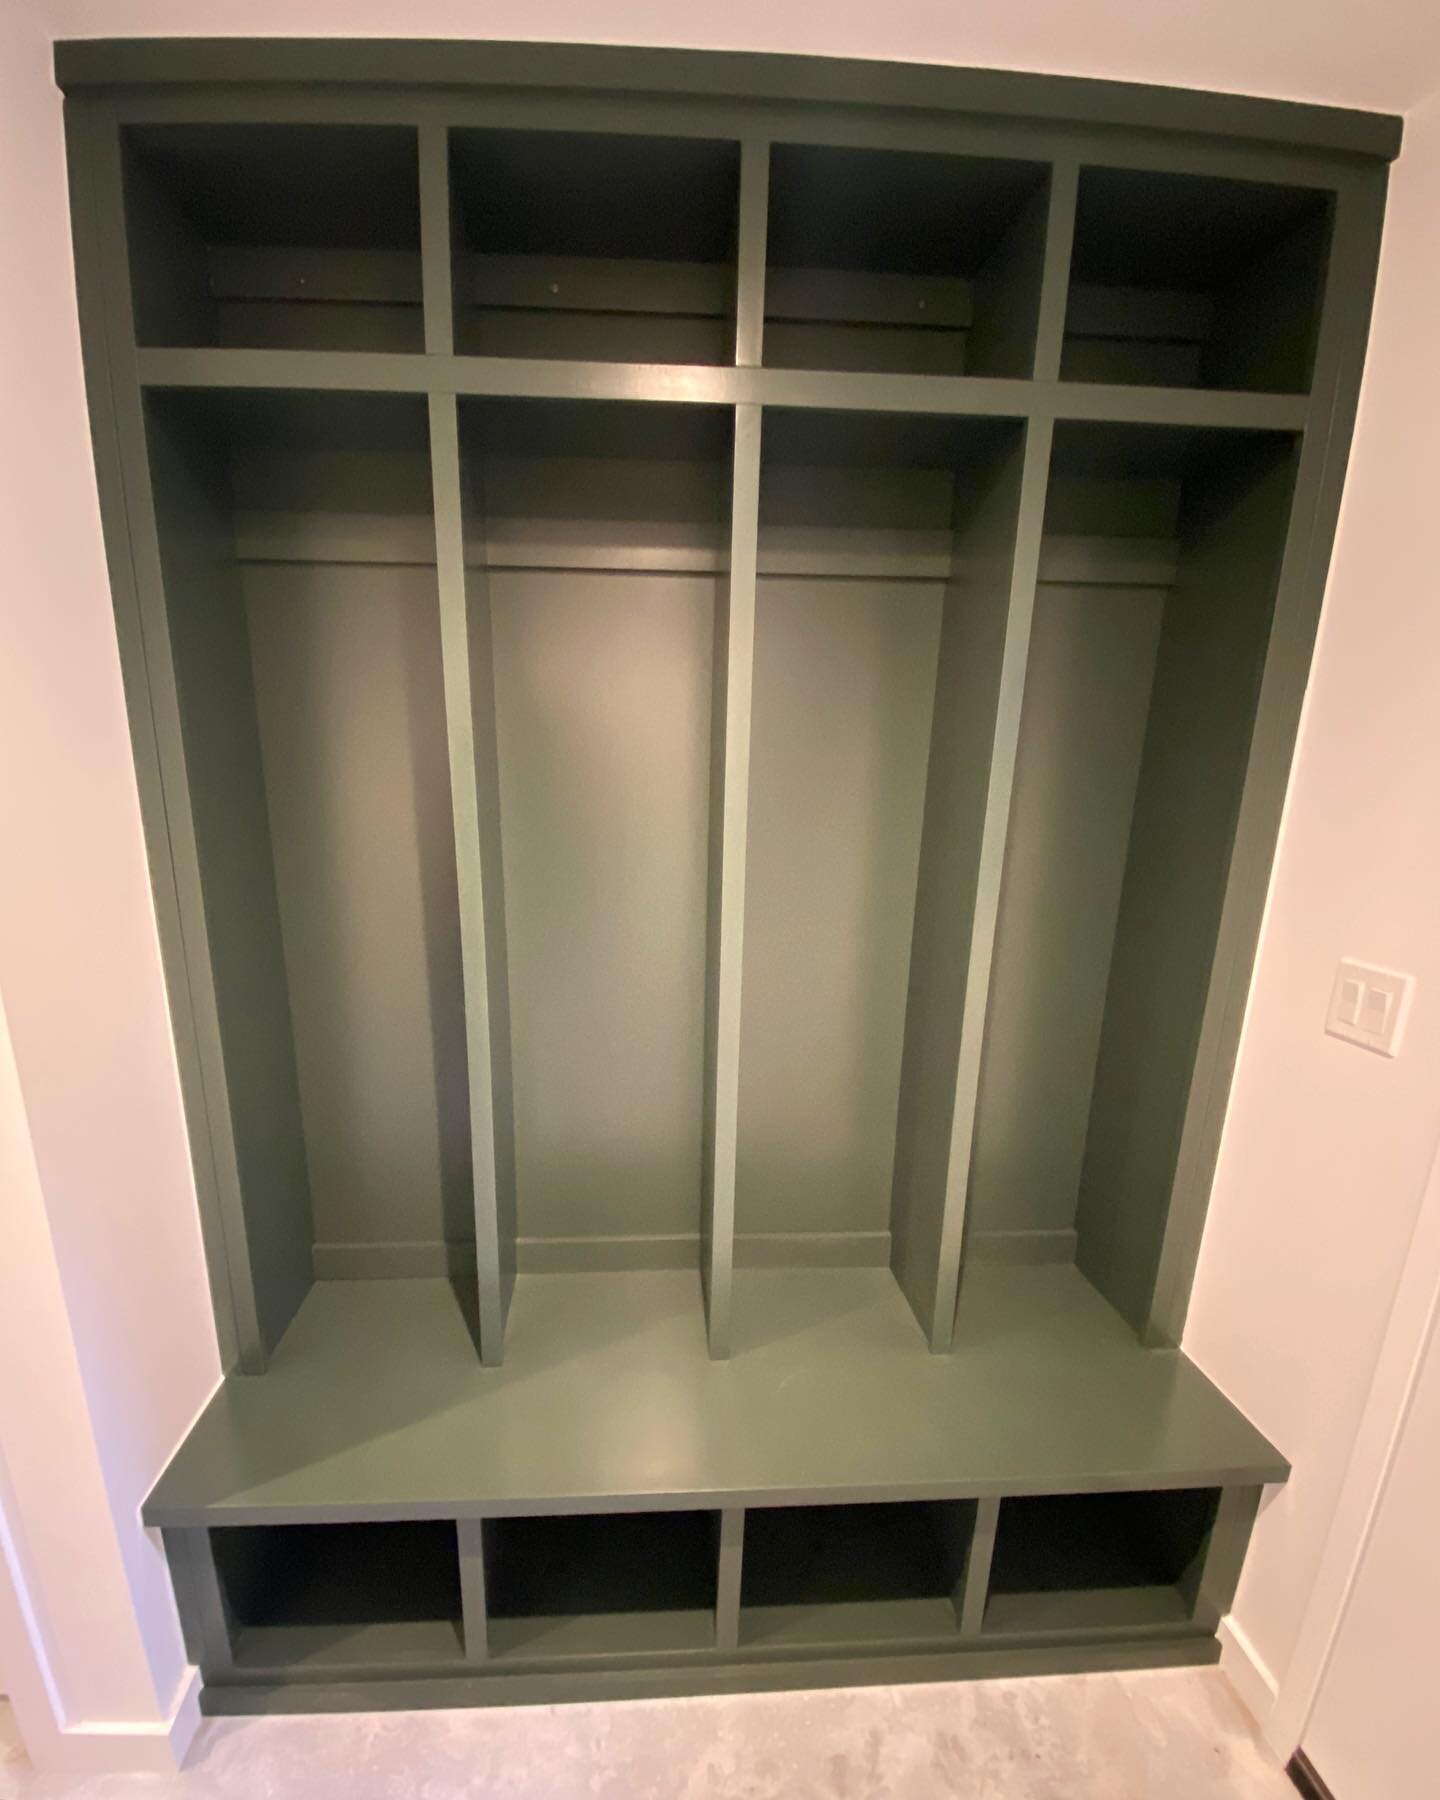 This one was at a tough angle to capture, but you get the gist... 
Custom designed built-in mud room coat rack / storage nook, perfect for this small space between the garage and basement playroom. Finished beautifully with Foxhall Green paint from @